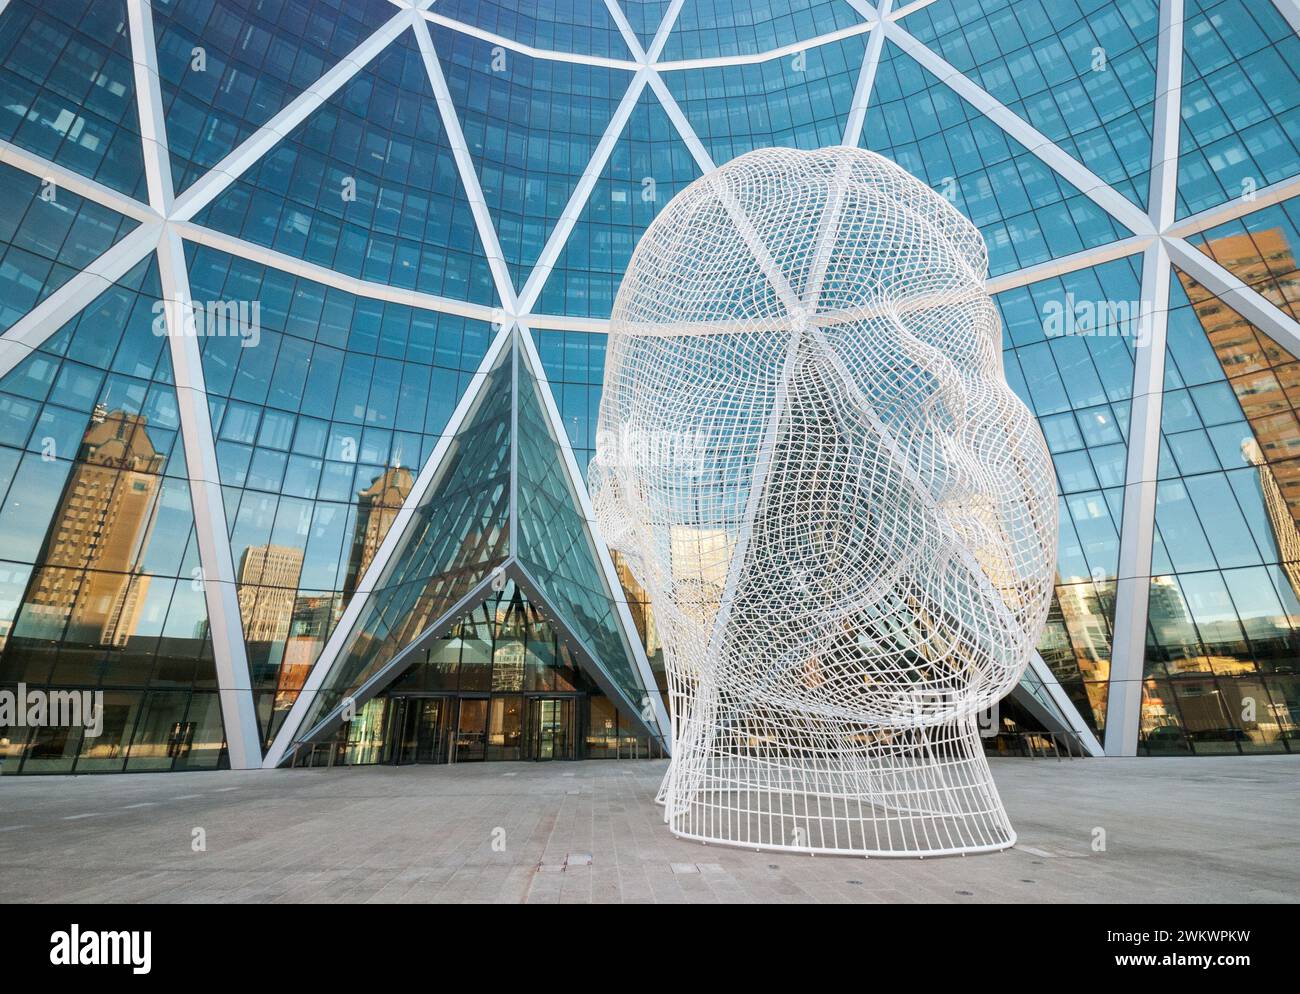 A twelve metre wire sculpture of a young girl's head by Spanish artist Jaume Plensa stands in front of Calgary's Bow Building. Stock Photo